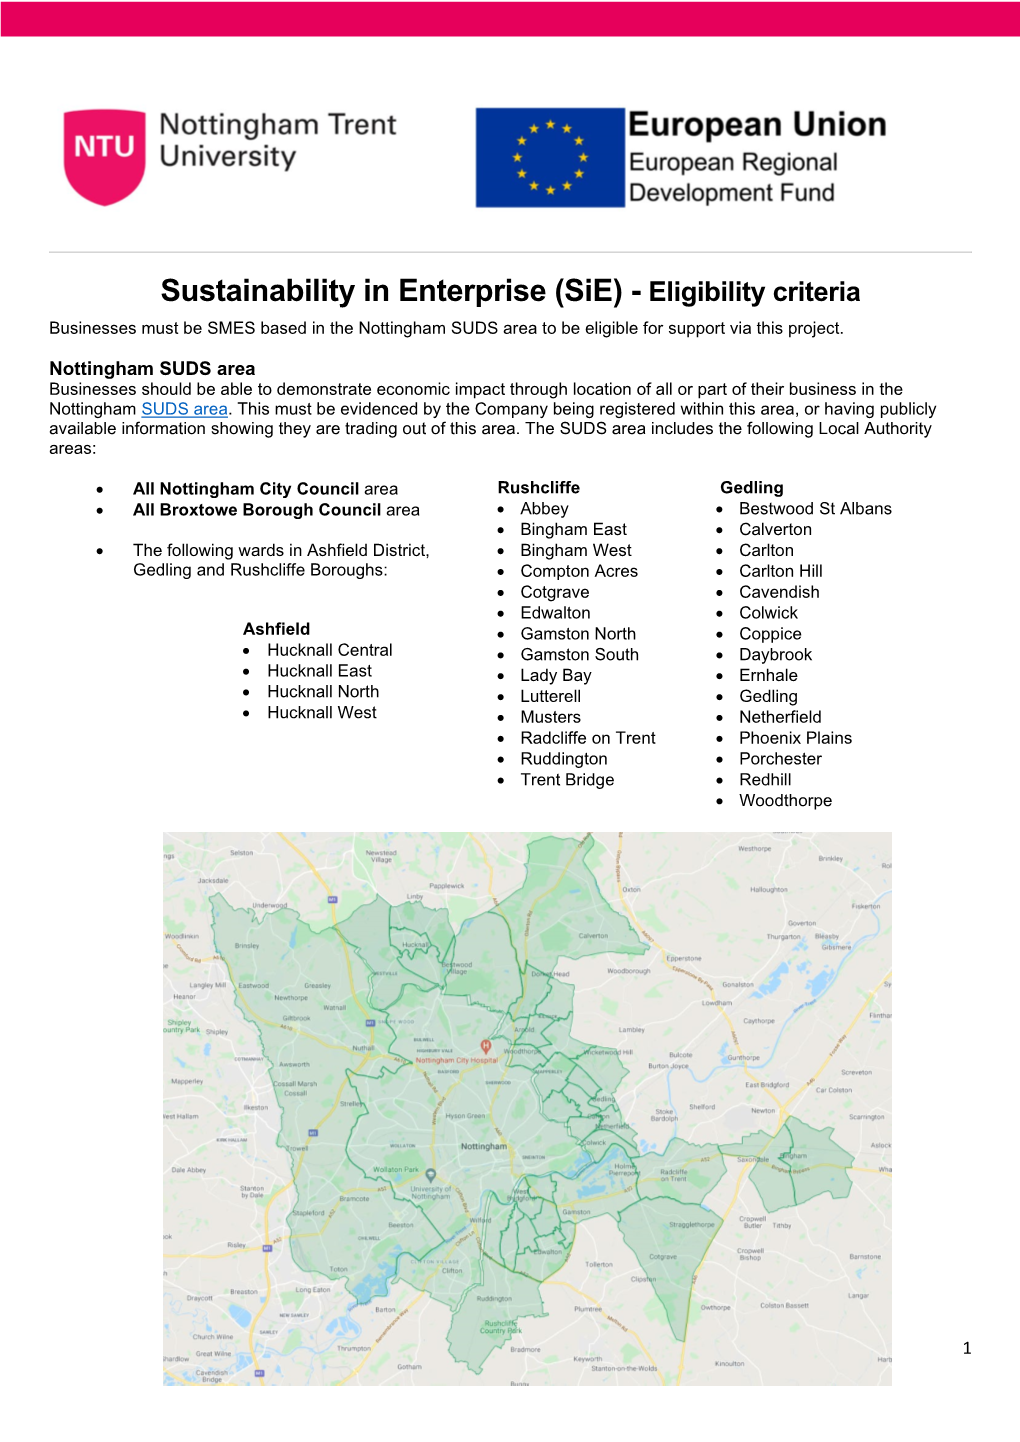 Eligibility Criteria Businesses Must Be SMES Based in the Nottingham SUDS Area to Be Eligible for Support Via This Project